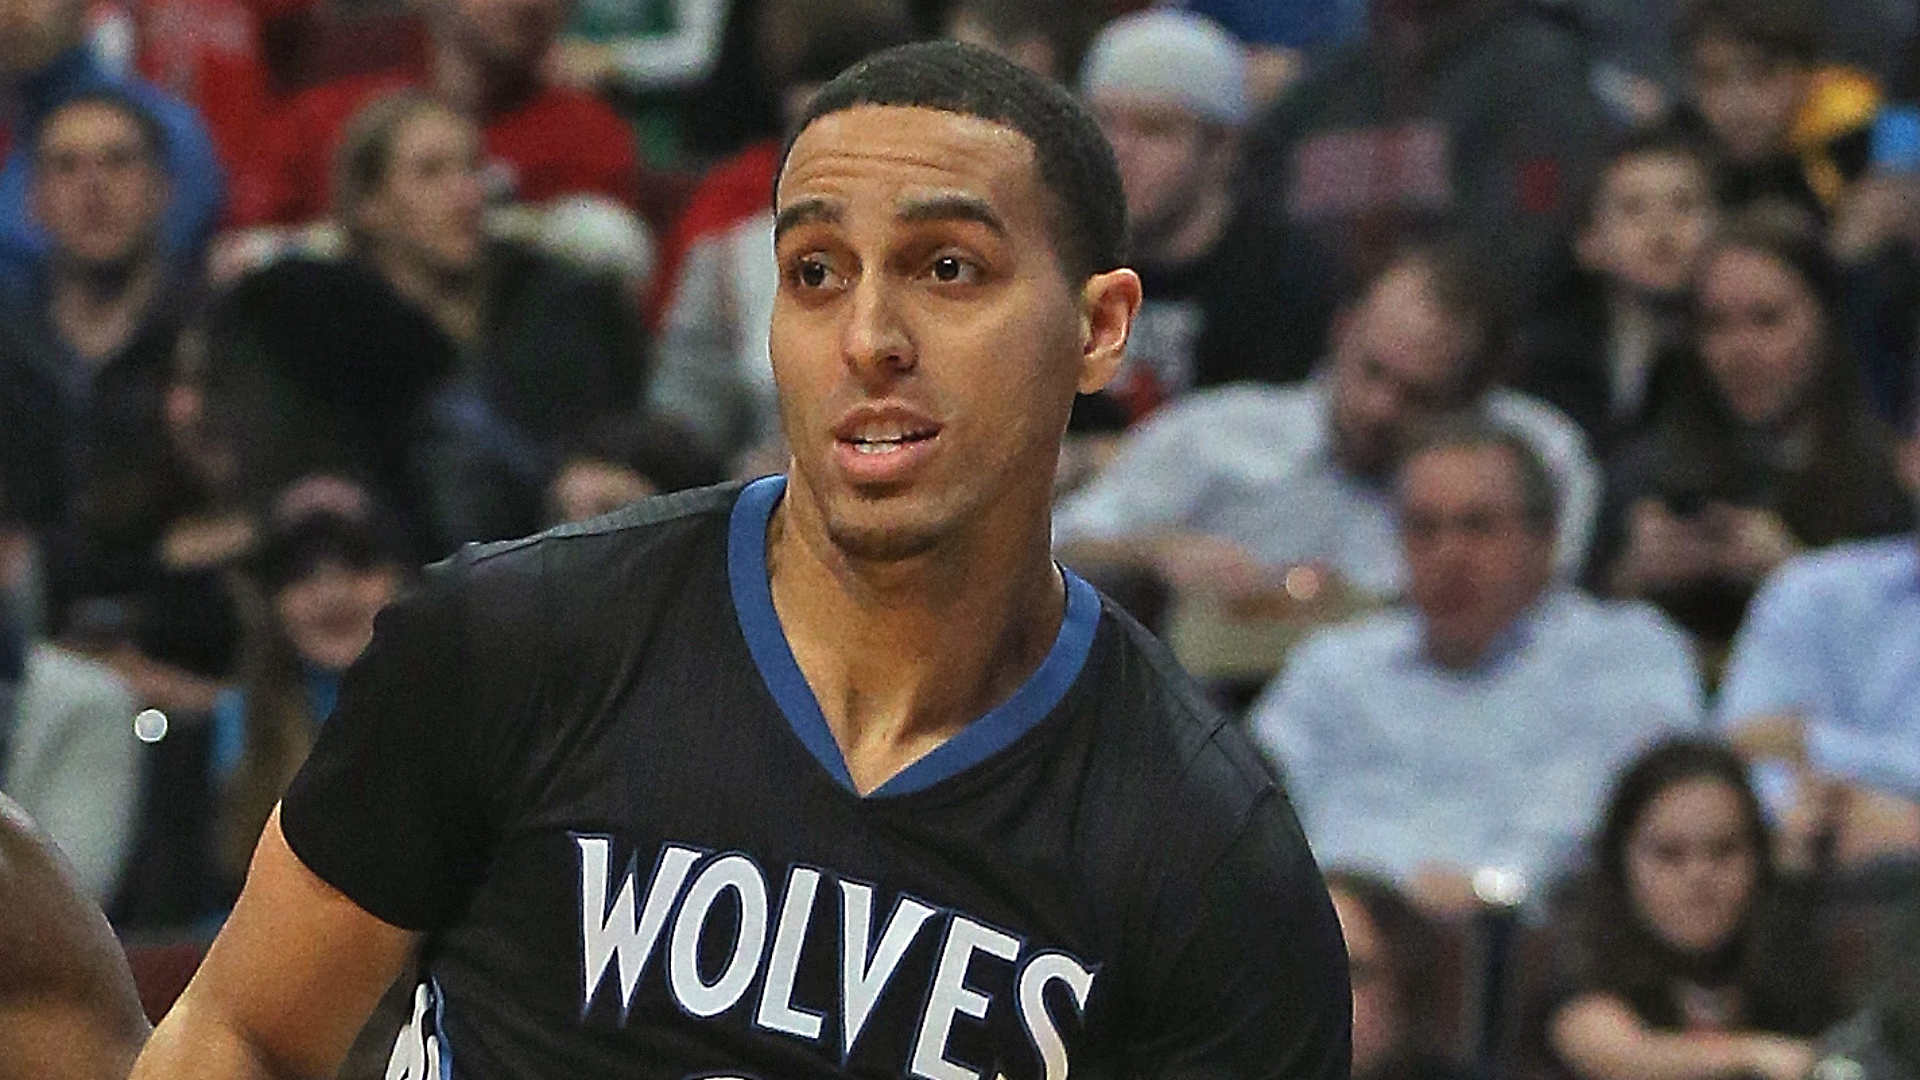 Kevin Martin announces retirement in newspaper ad1920 x 1080